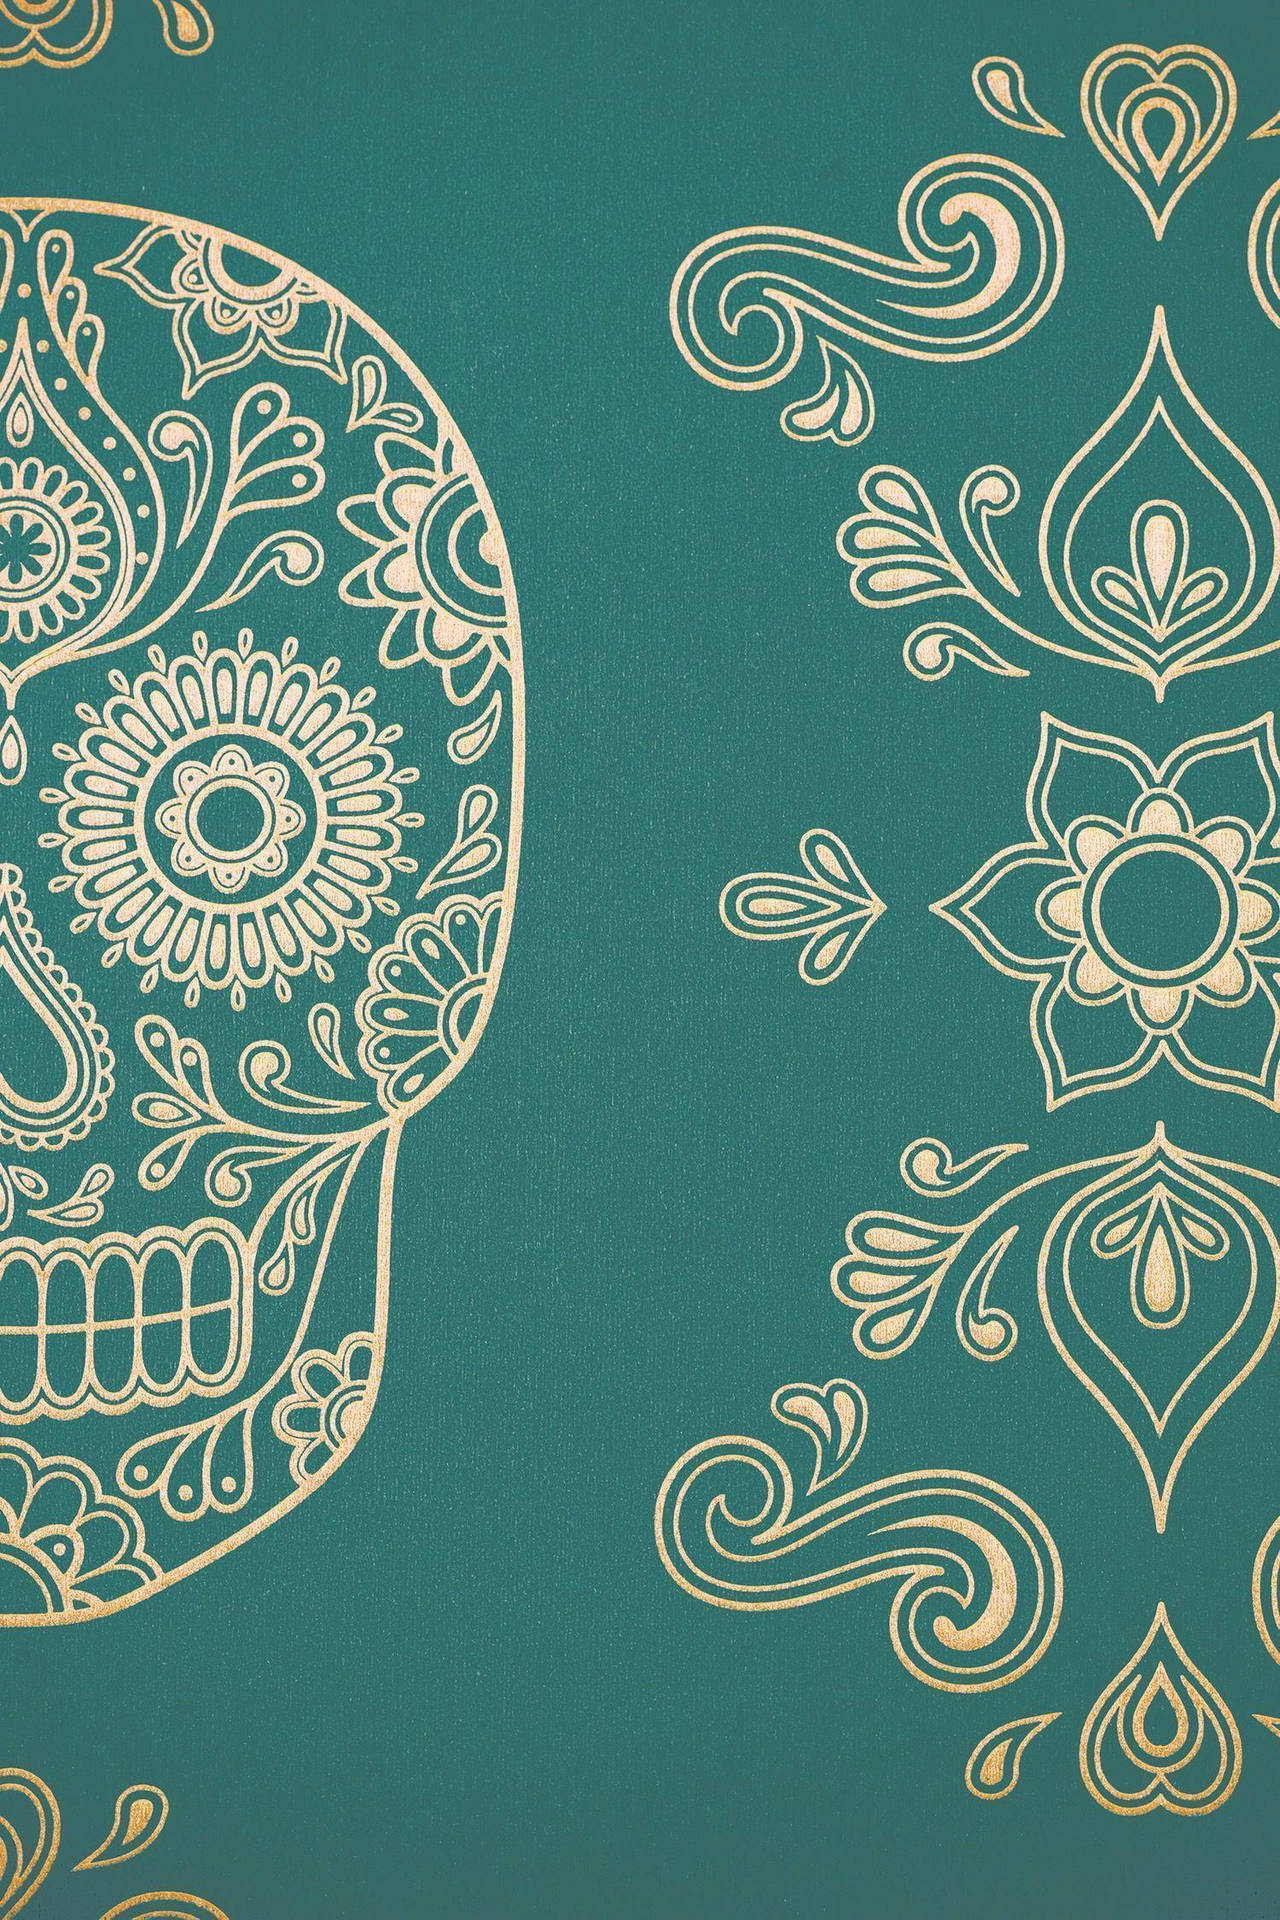 Teal Day Of The Dead For Phone